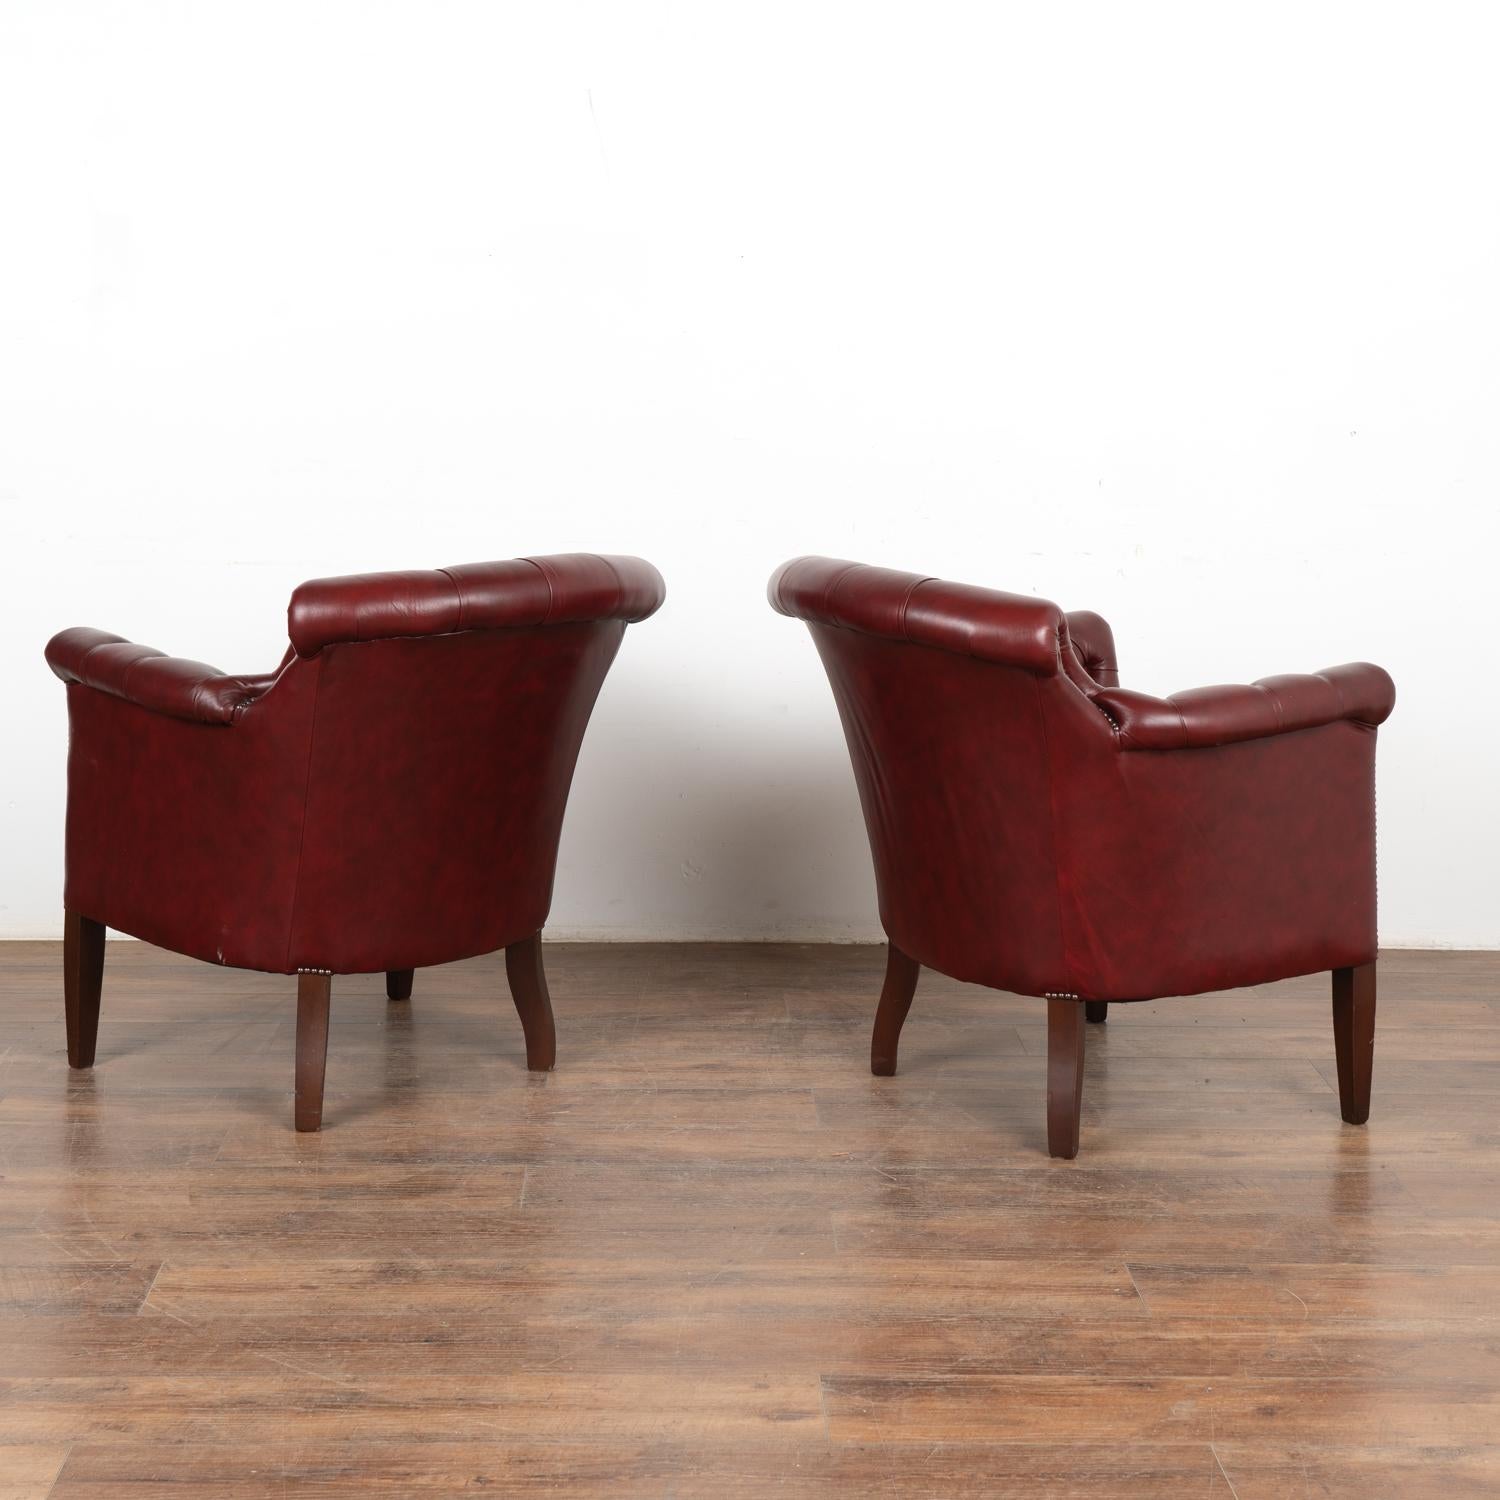 Pair, Vintage Red Leather Chesterfield Club Armchairs, Denmark circa 1940-60 For Sale 3